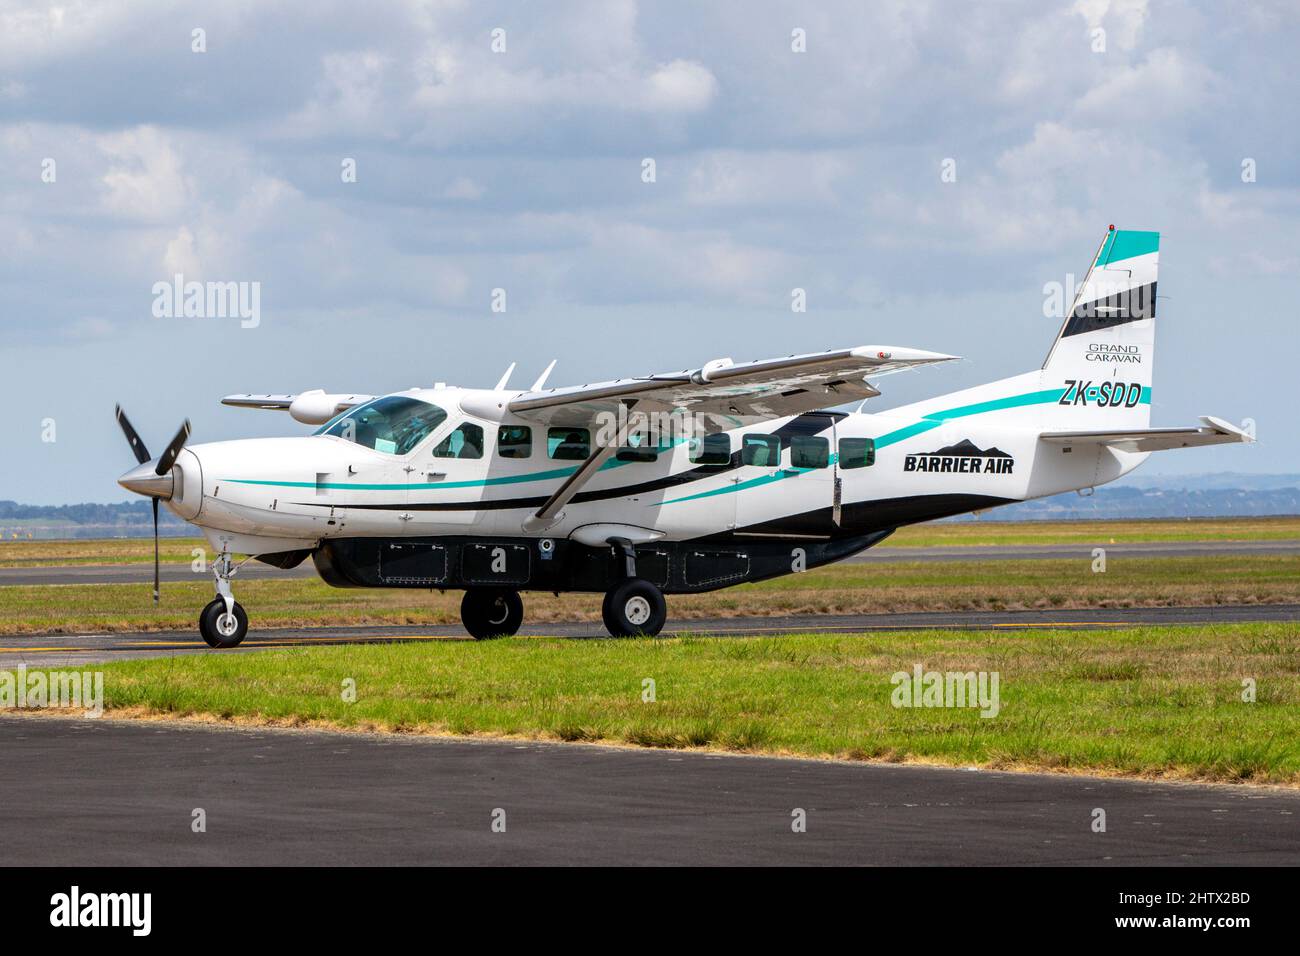 Barrier Air Cessna on runway at Auckland Airport, New Zealand on Monday, February 28, 2022. Stock Photo